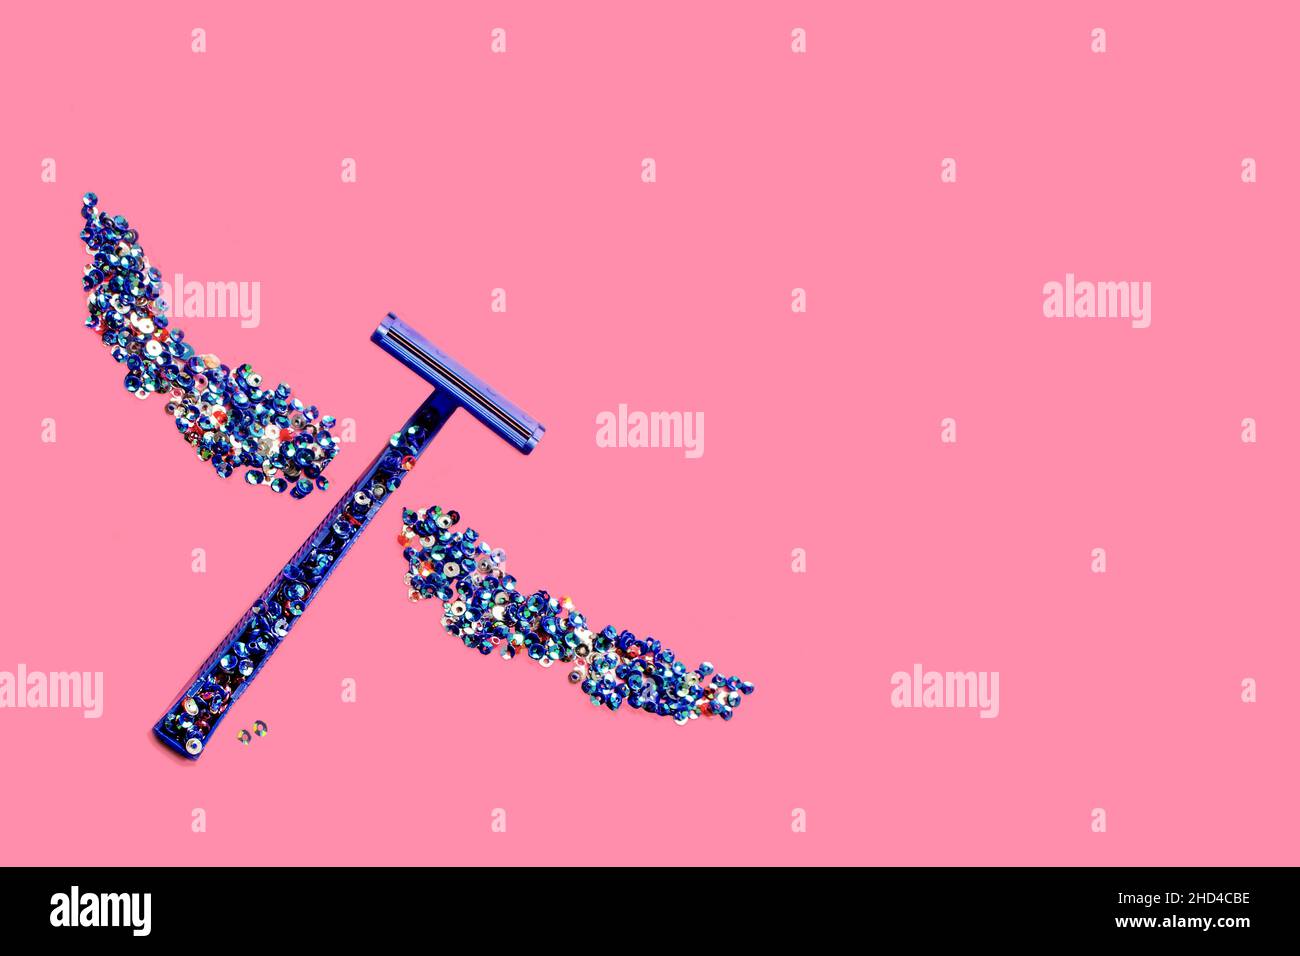 Razor blade and a pair of wings made of sparkling little dazzles on a pink background Stock Photo